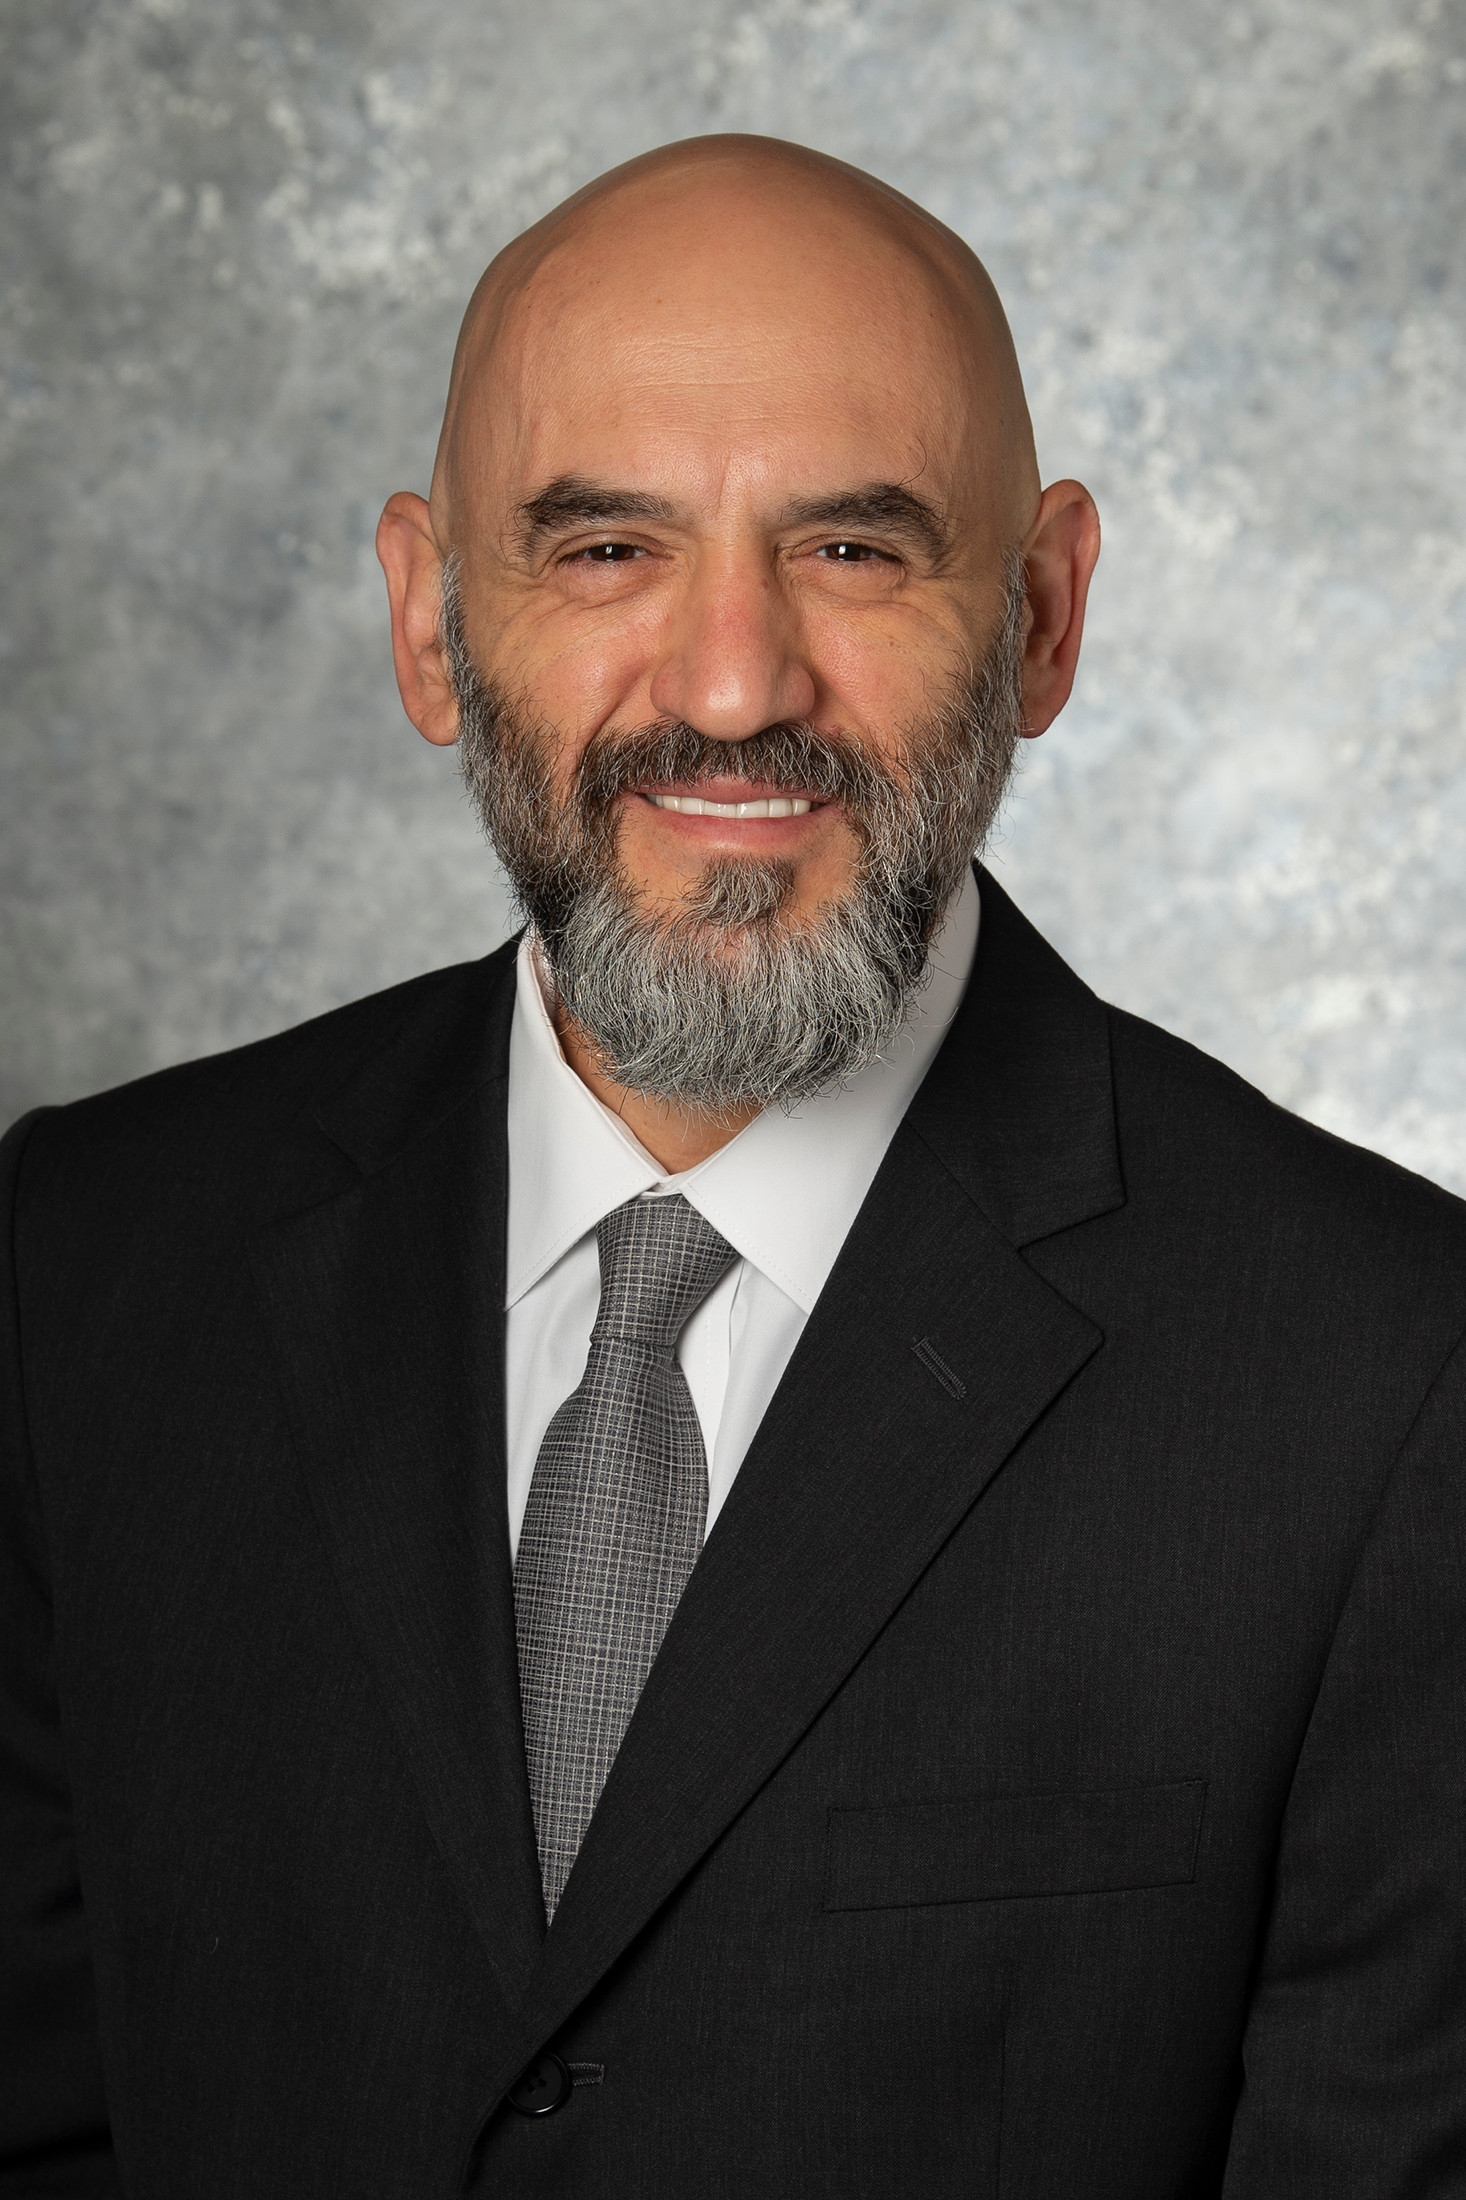 A headshot of Halit Üster, a member of the Lyle School of Engineering Faculty.